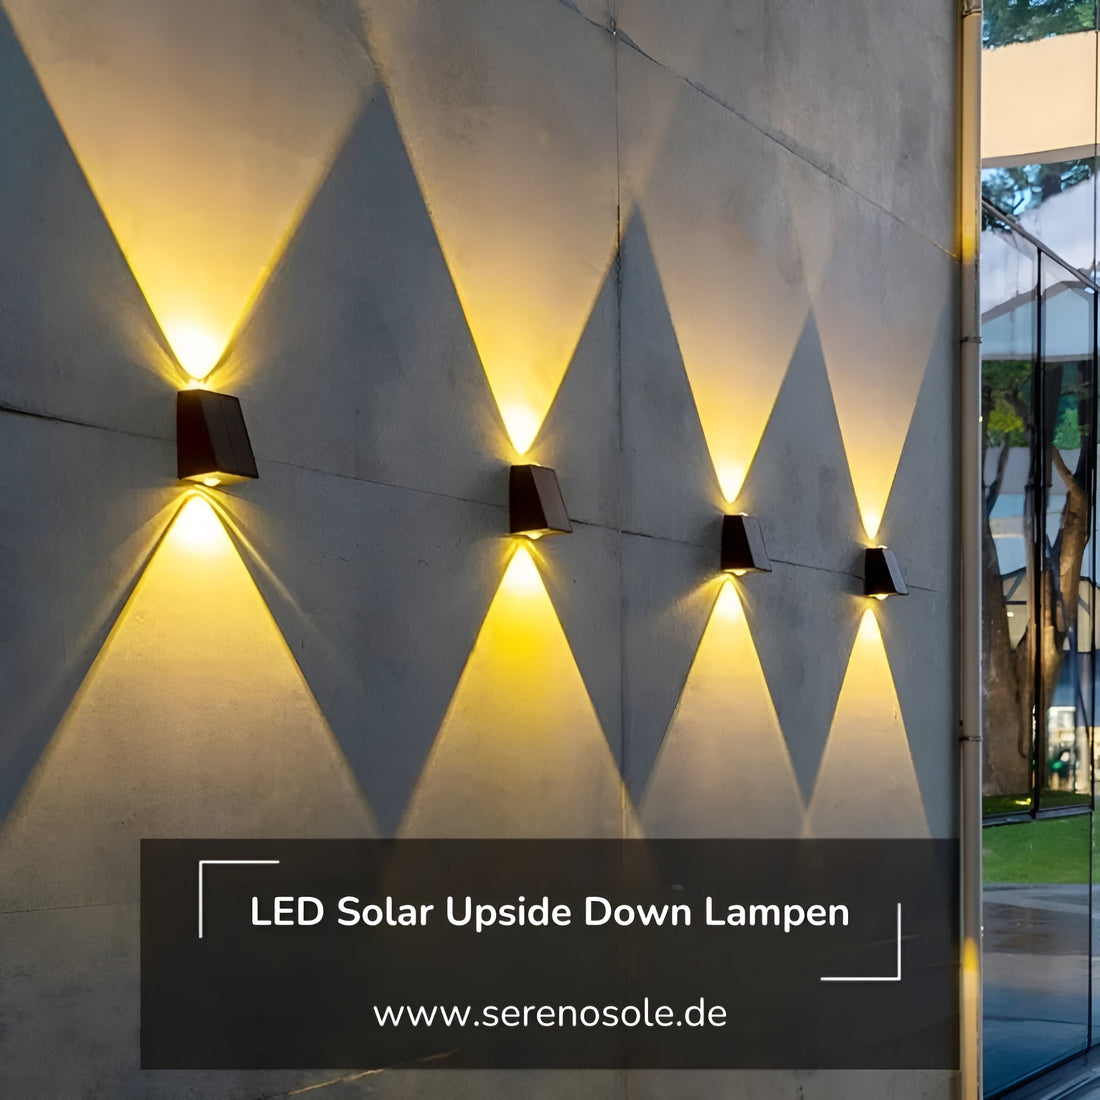 Wireless LED Solar Upside Down Lamps-Create the perfect atmosphere in your garden!